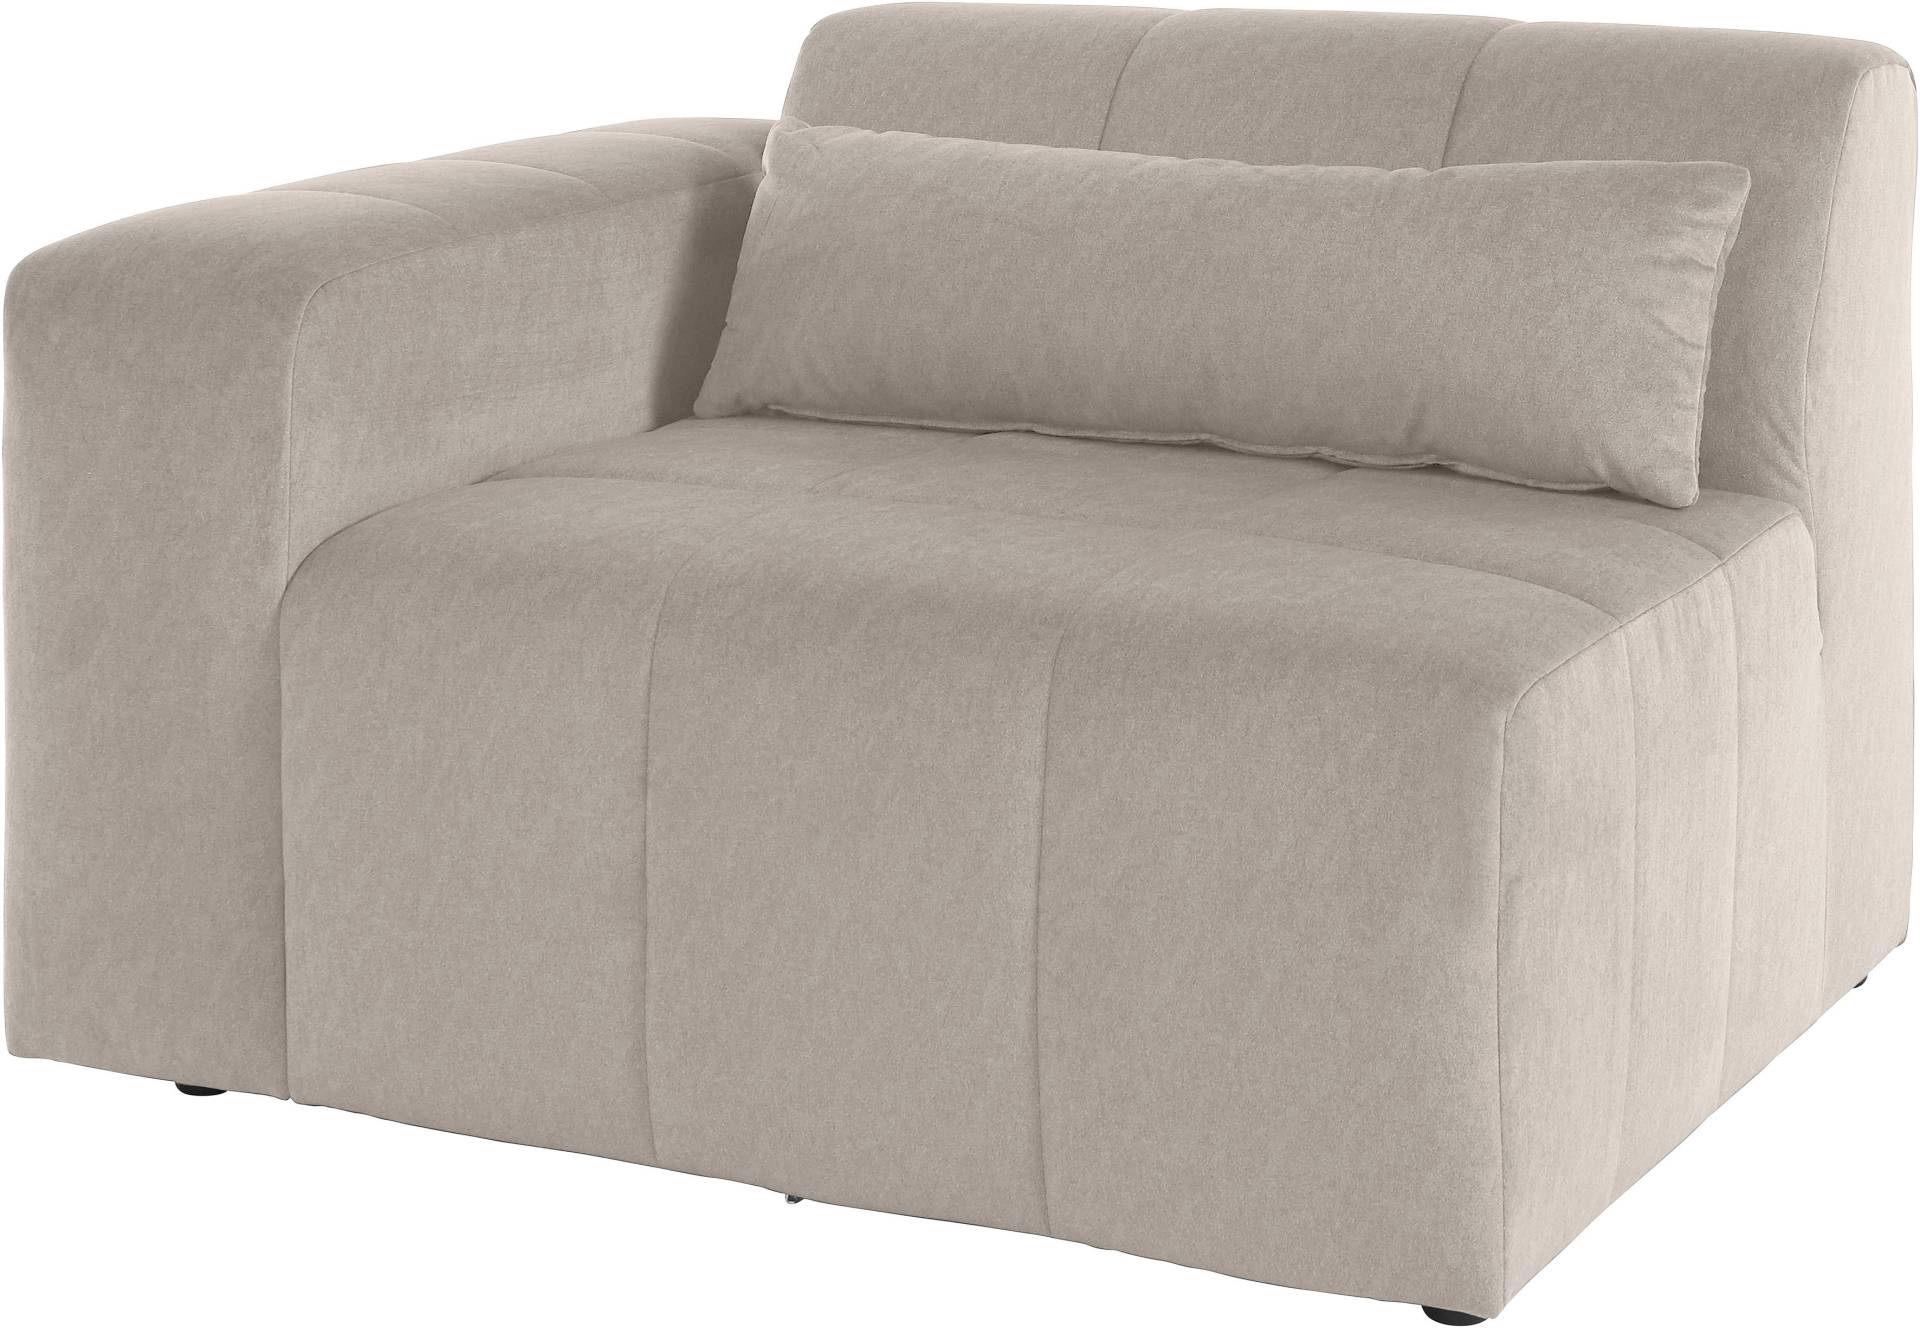 LeGer Home by Lena Gercke Sofaelement »Maileen« von LeGer Home by Lena Gercke